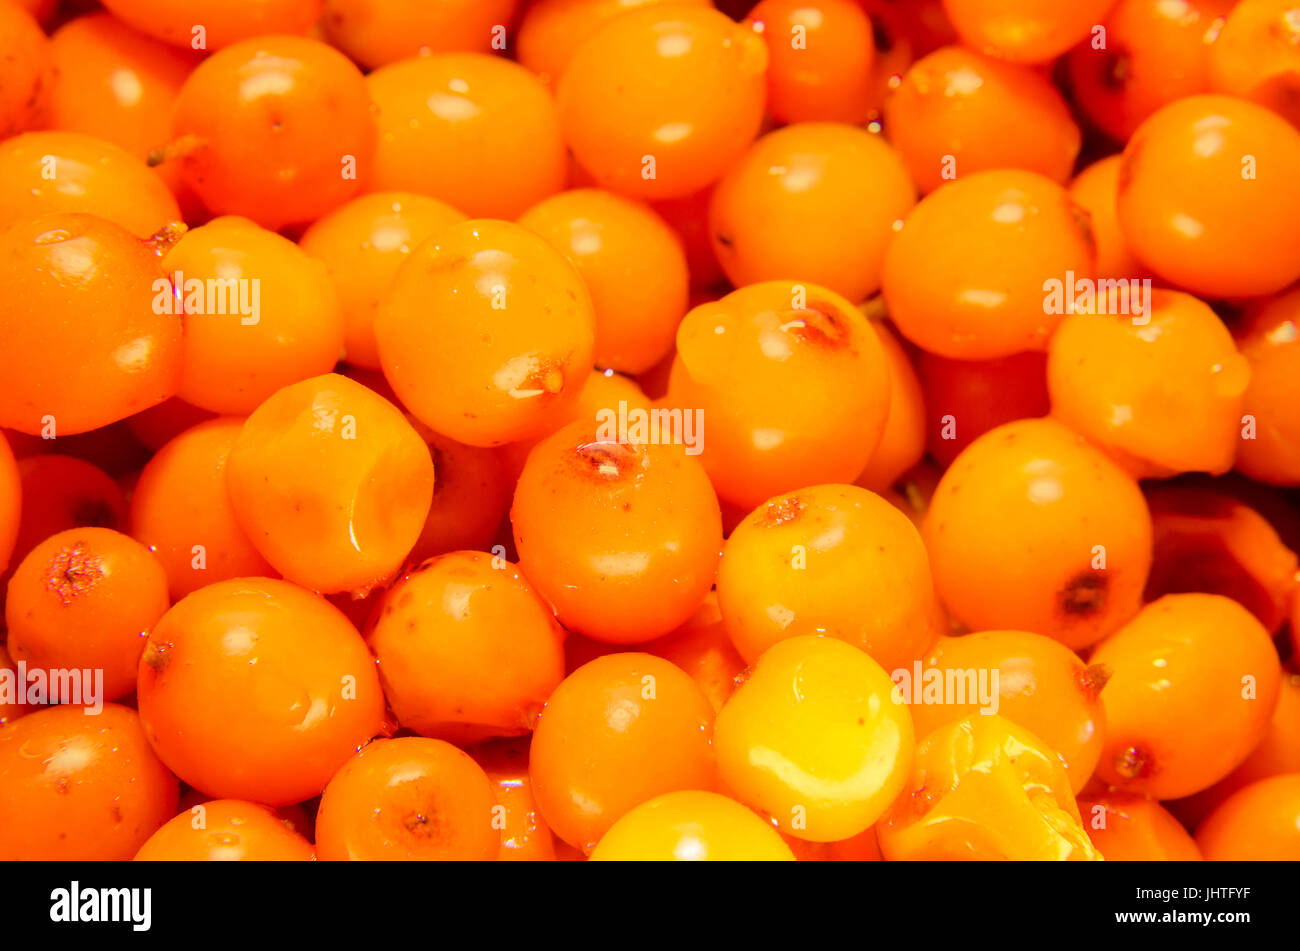 Orange fruits of Hippophae rhamnoides, common name sea-buckthorn, in romanian known as 'Catina' or 'Catina alba'. Stock Photo